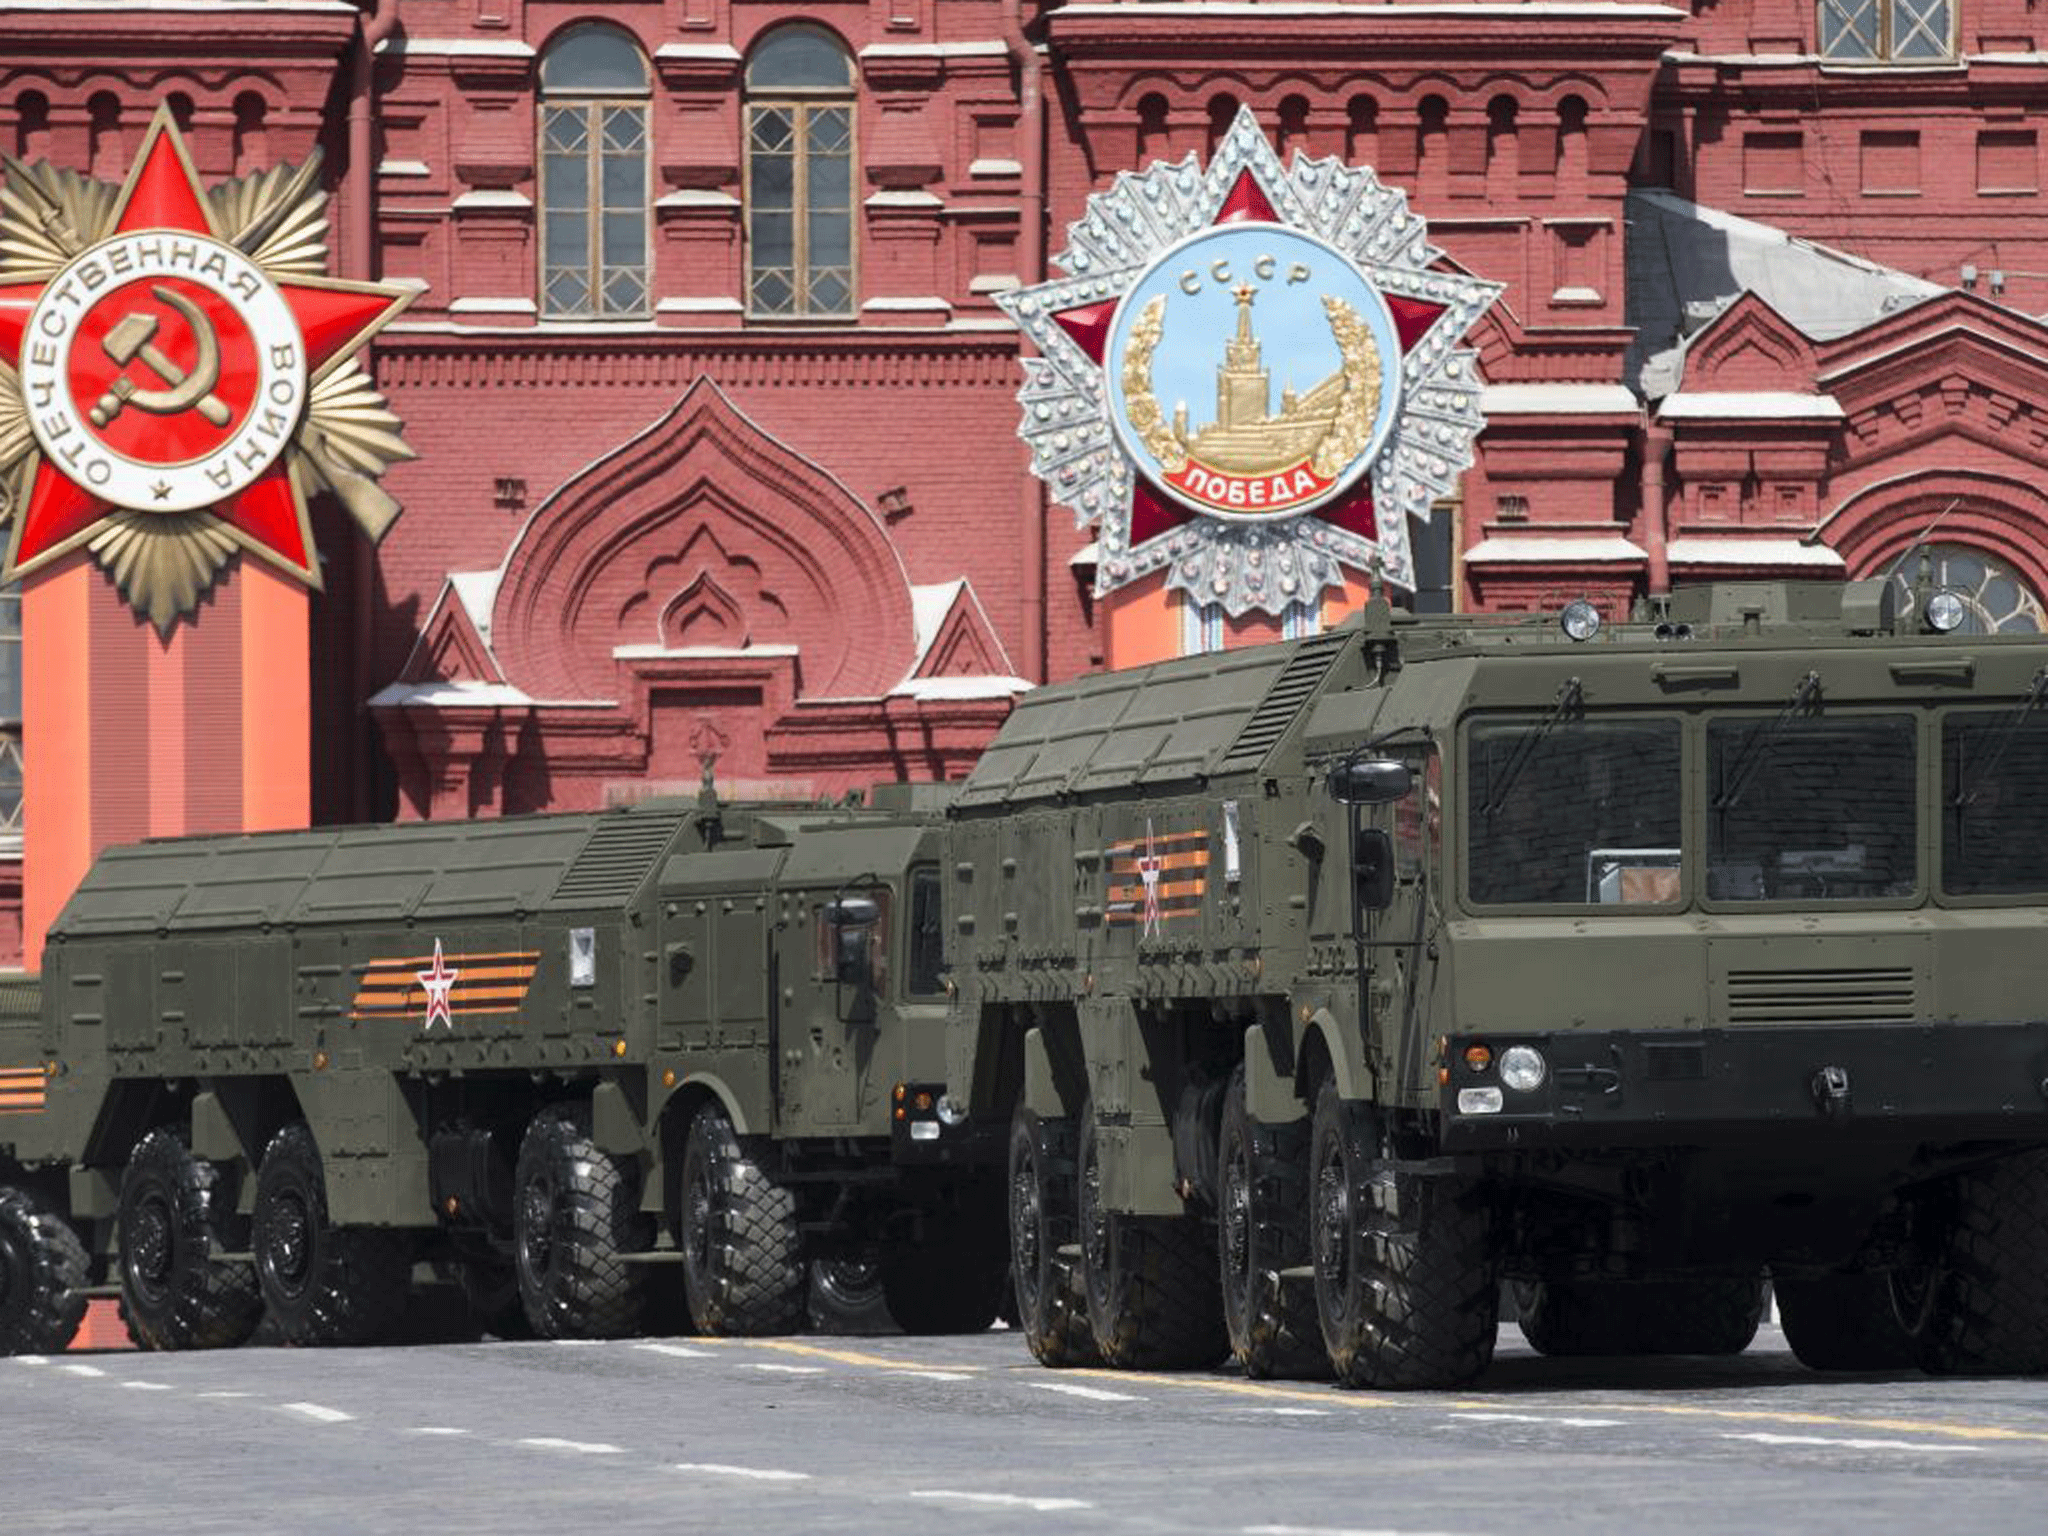 Iskander missile launchers are driven during the Victory Parade marking the 70th anniversary of the defeat of the Nazis